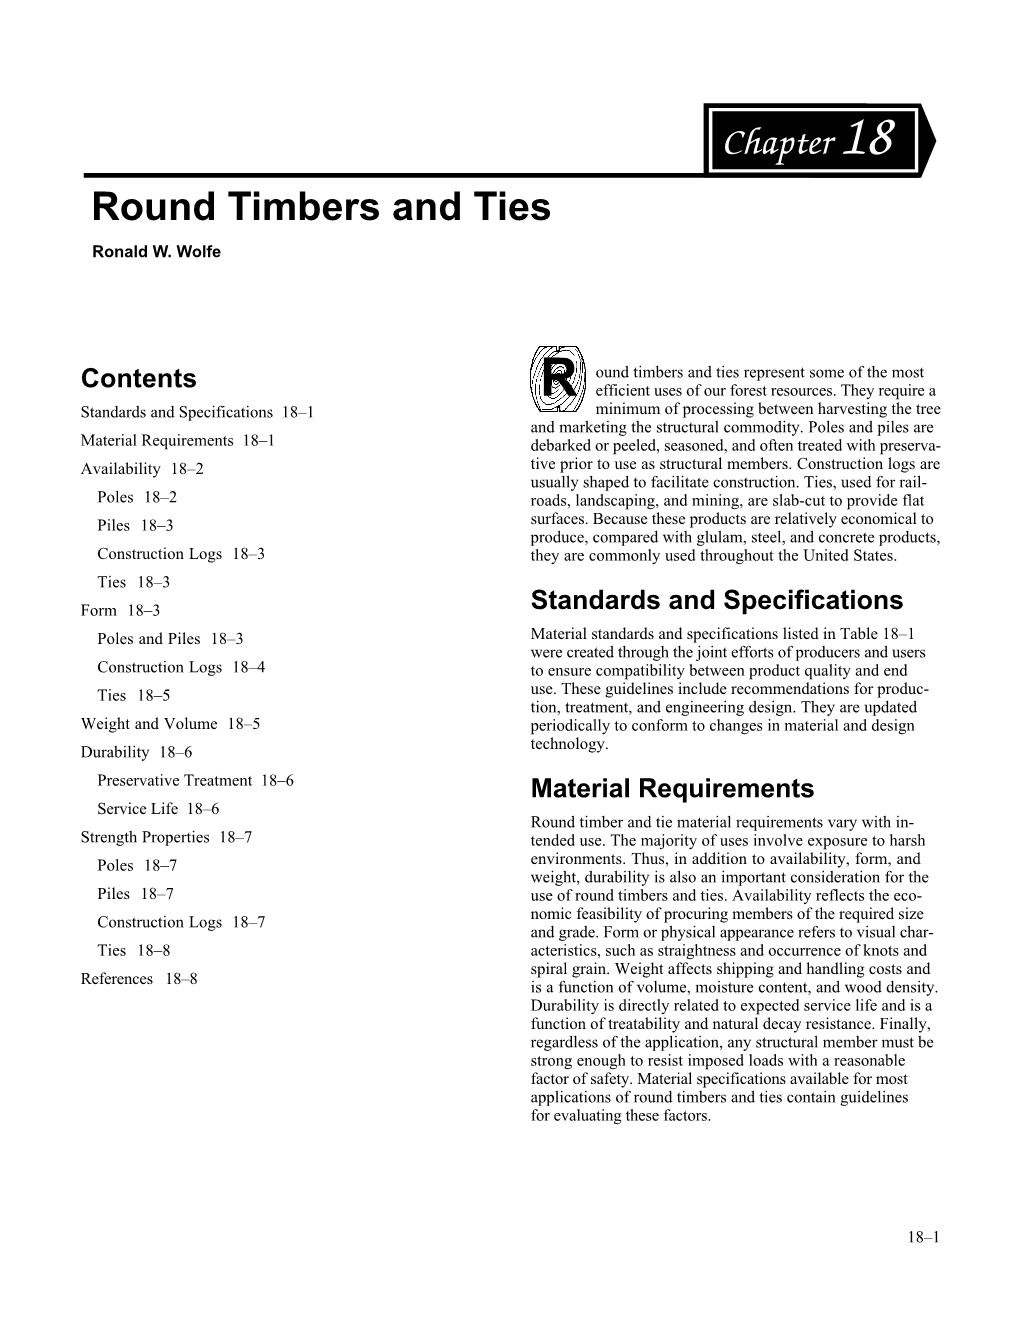 Wood Handbook--Chapter 18--Round Timbers and Ties